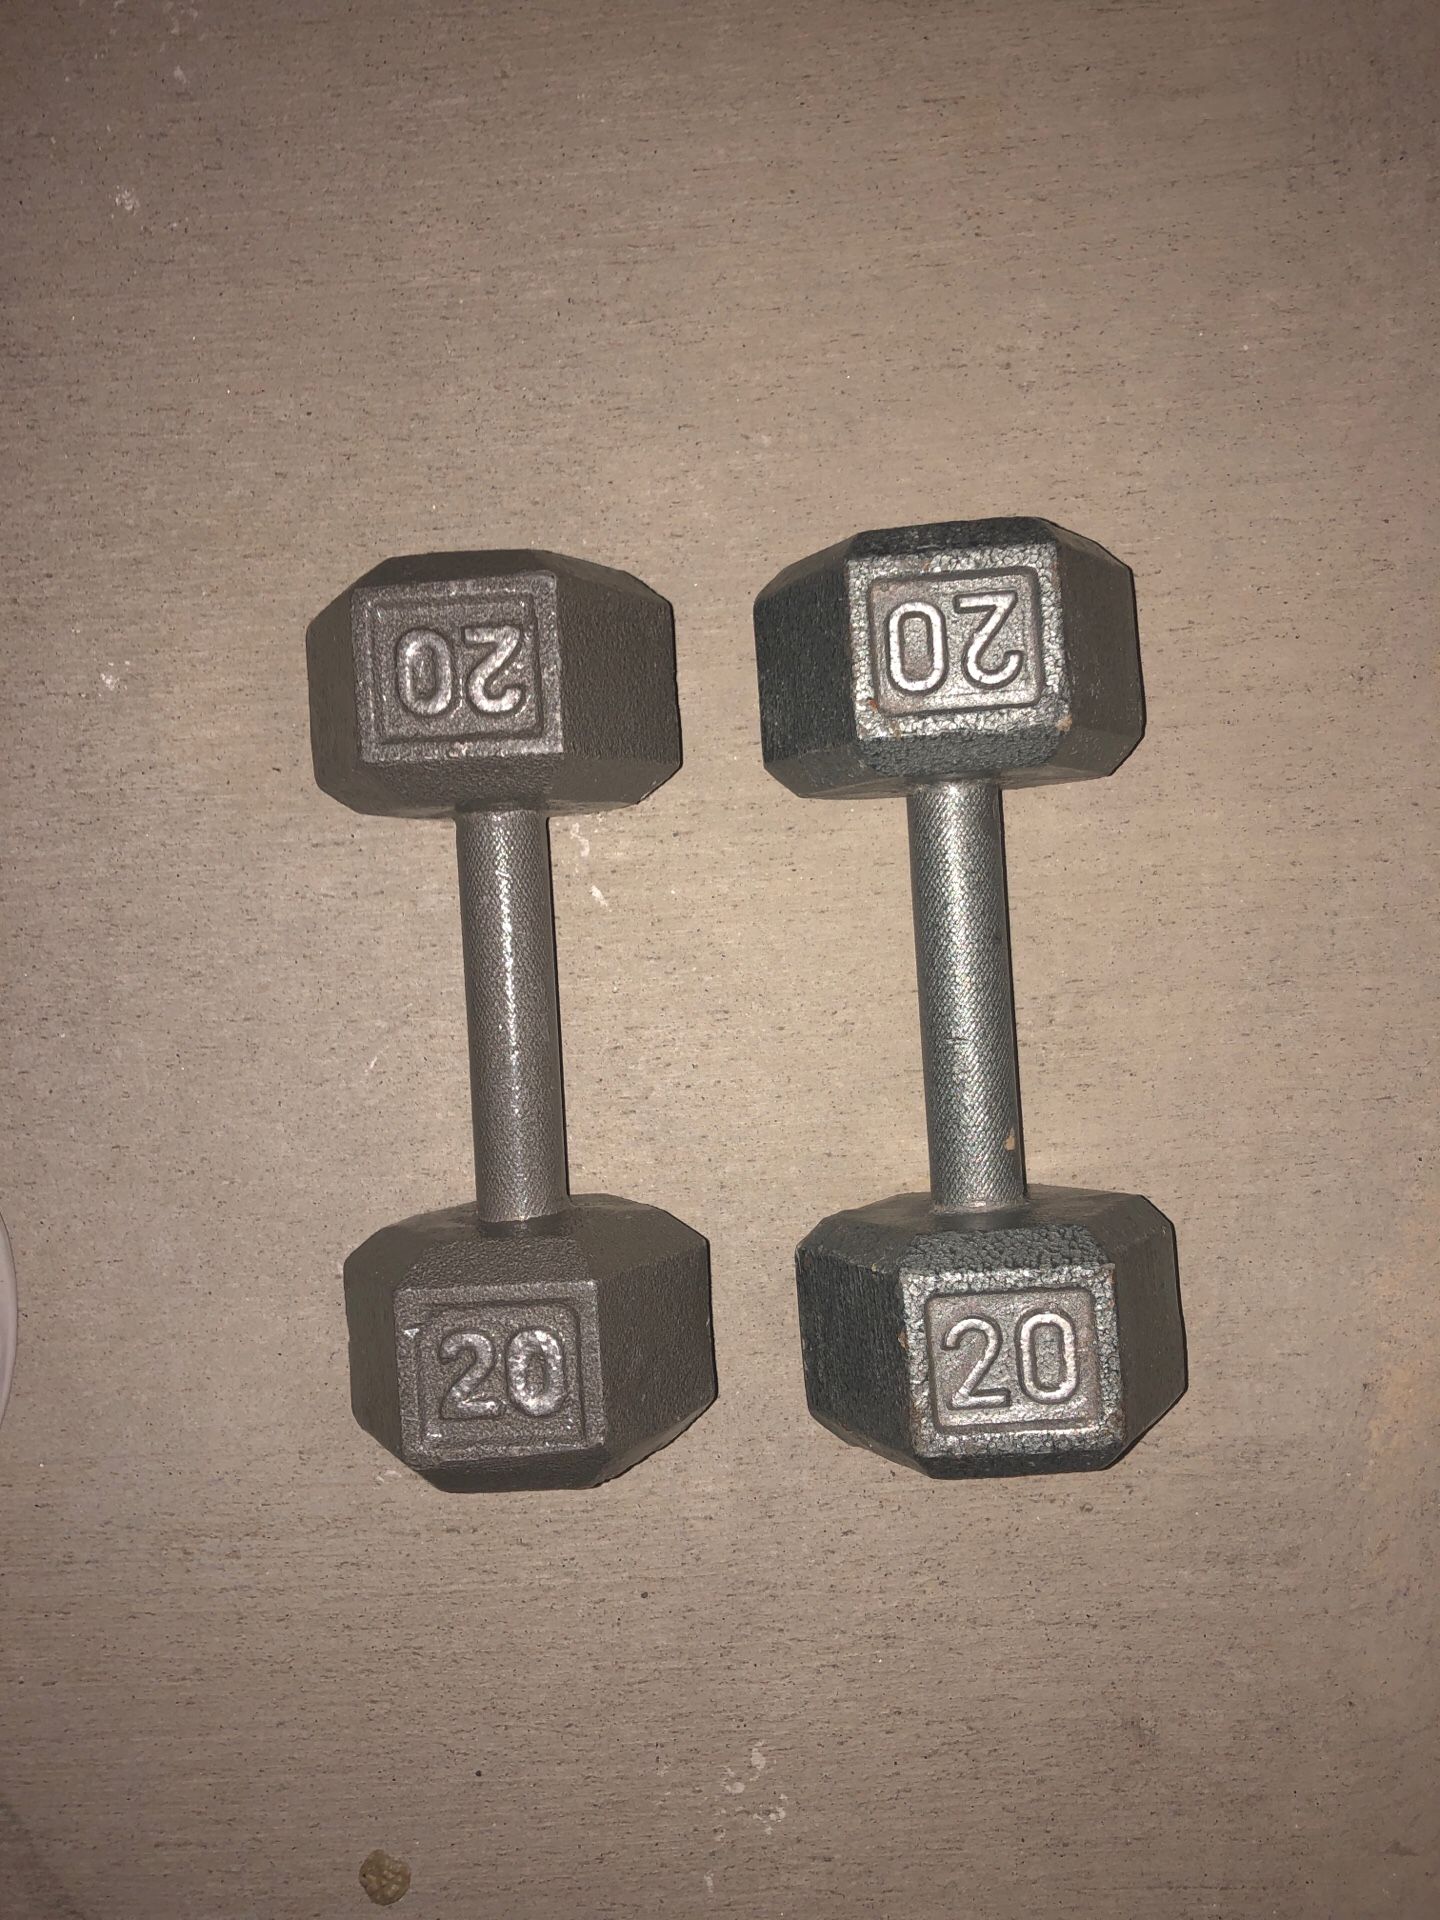 20 lb dumbbells 20 pounds free weight